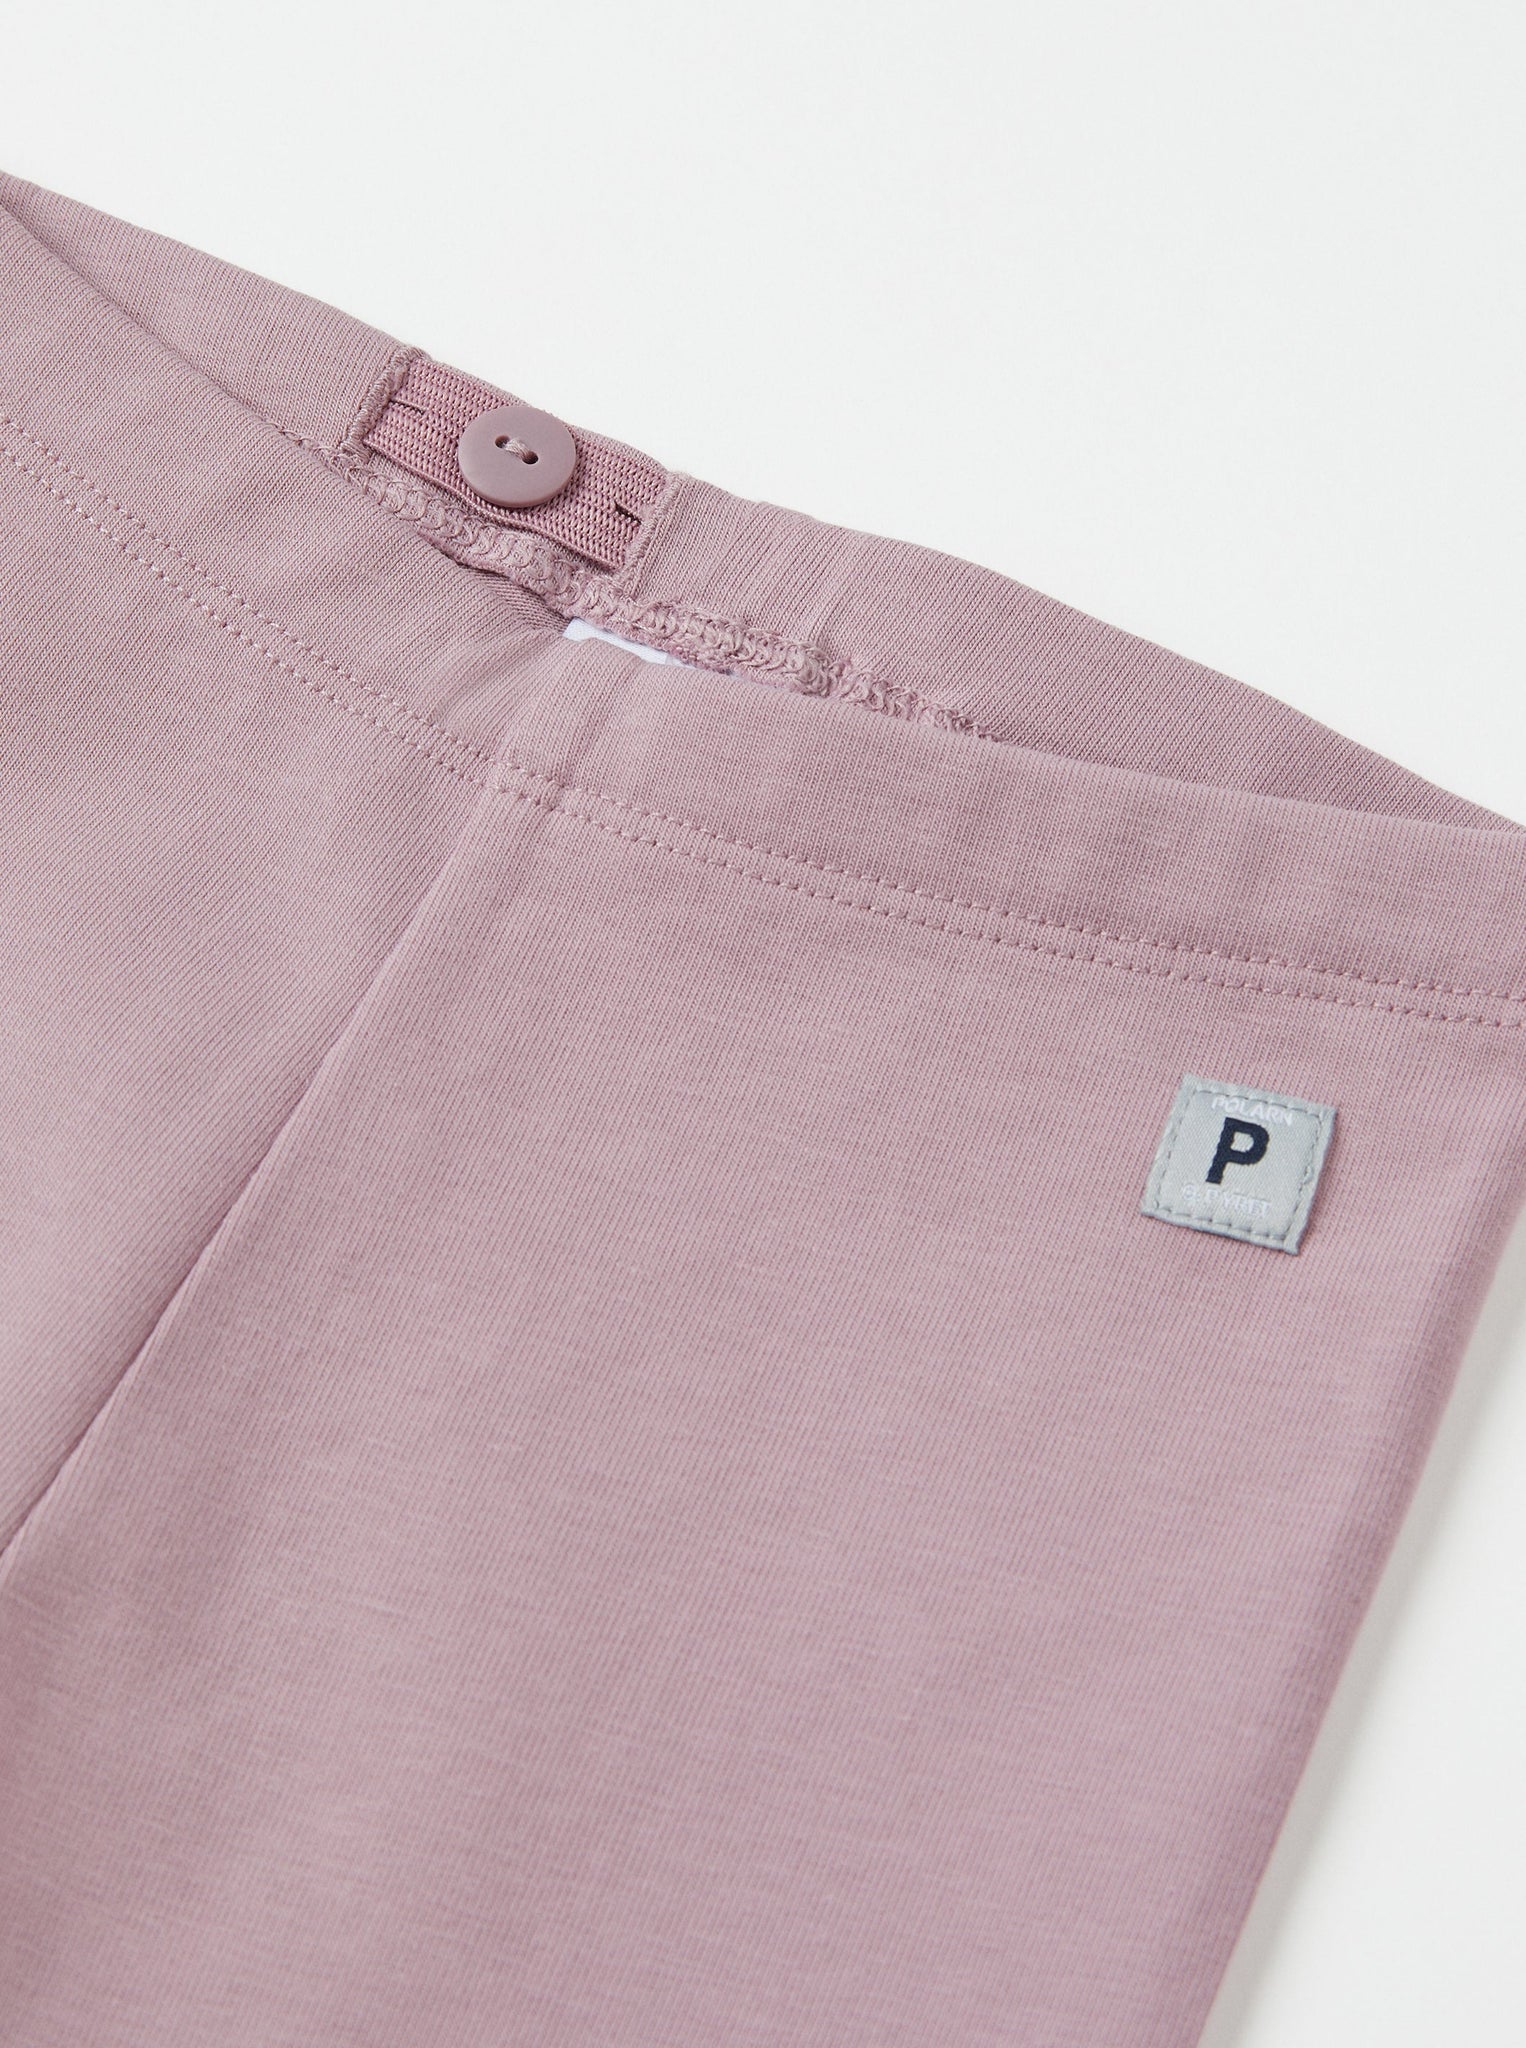 Organic Cotton Purple Baby Leggings from the Polarn O. Pyret babywear collection. The best ethical kids clothes